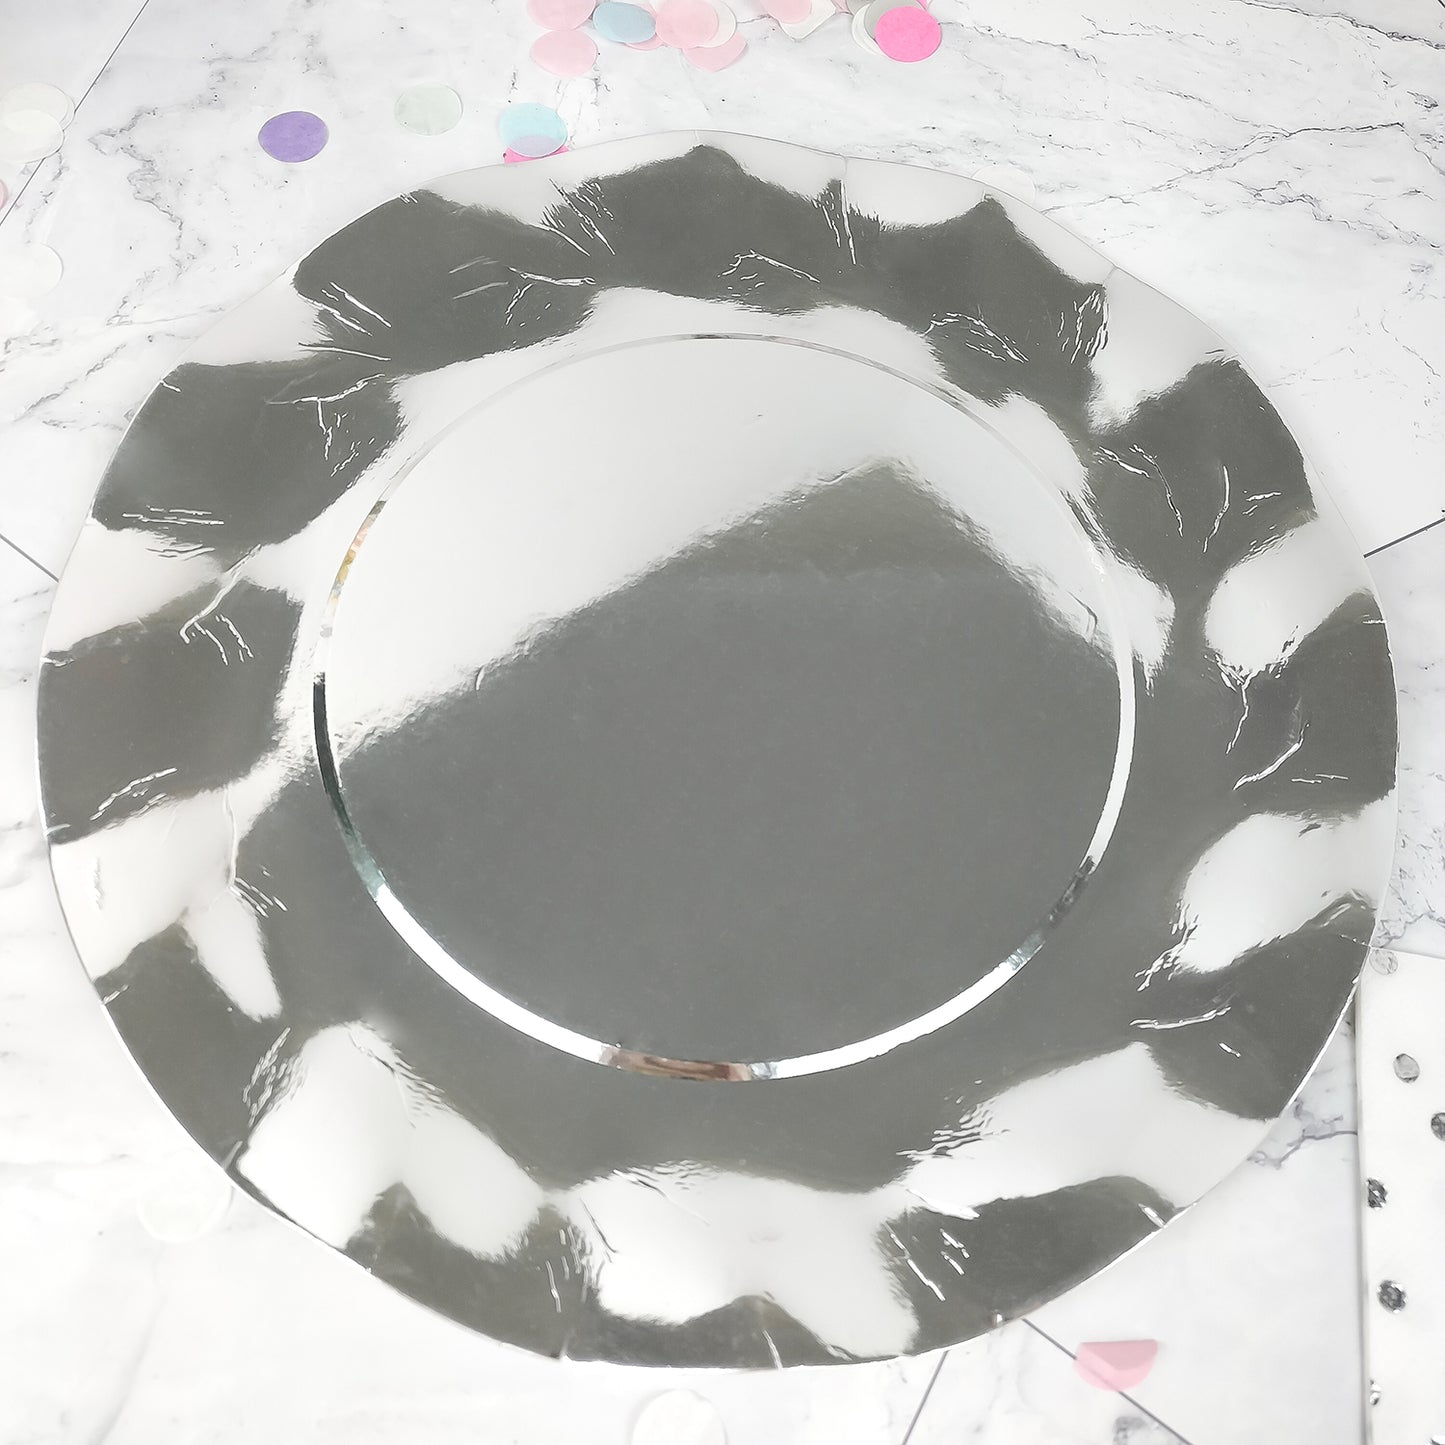 New Lobed Wheel Metallic Silver Paper plate Dessert Plate for Birthday Party Valentine's Day Weddings